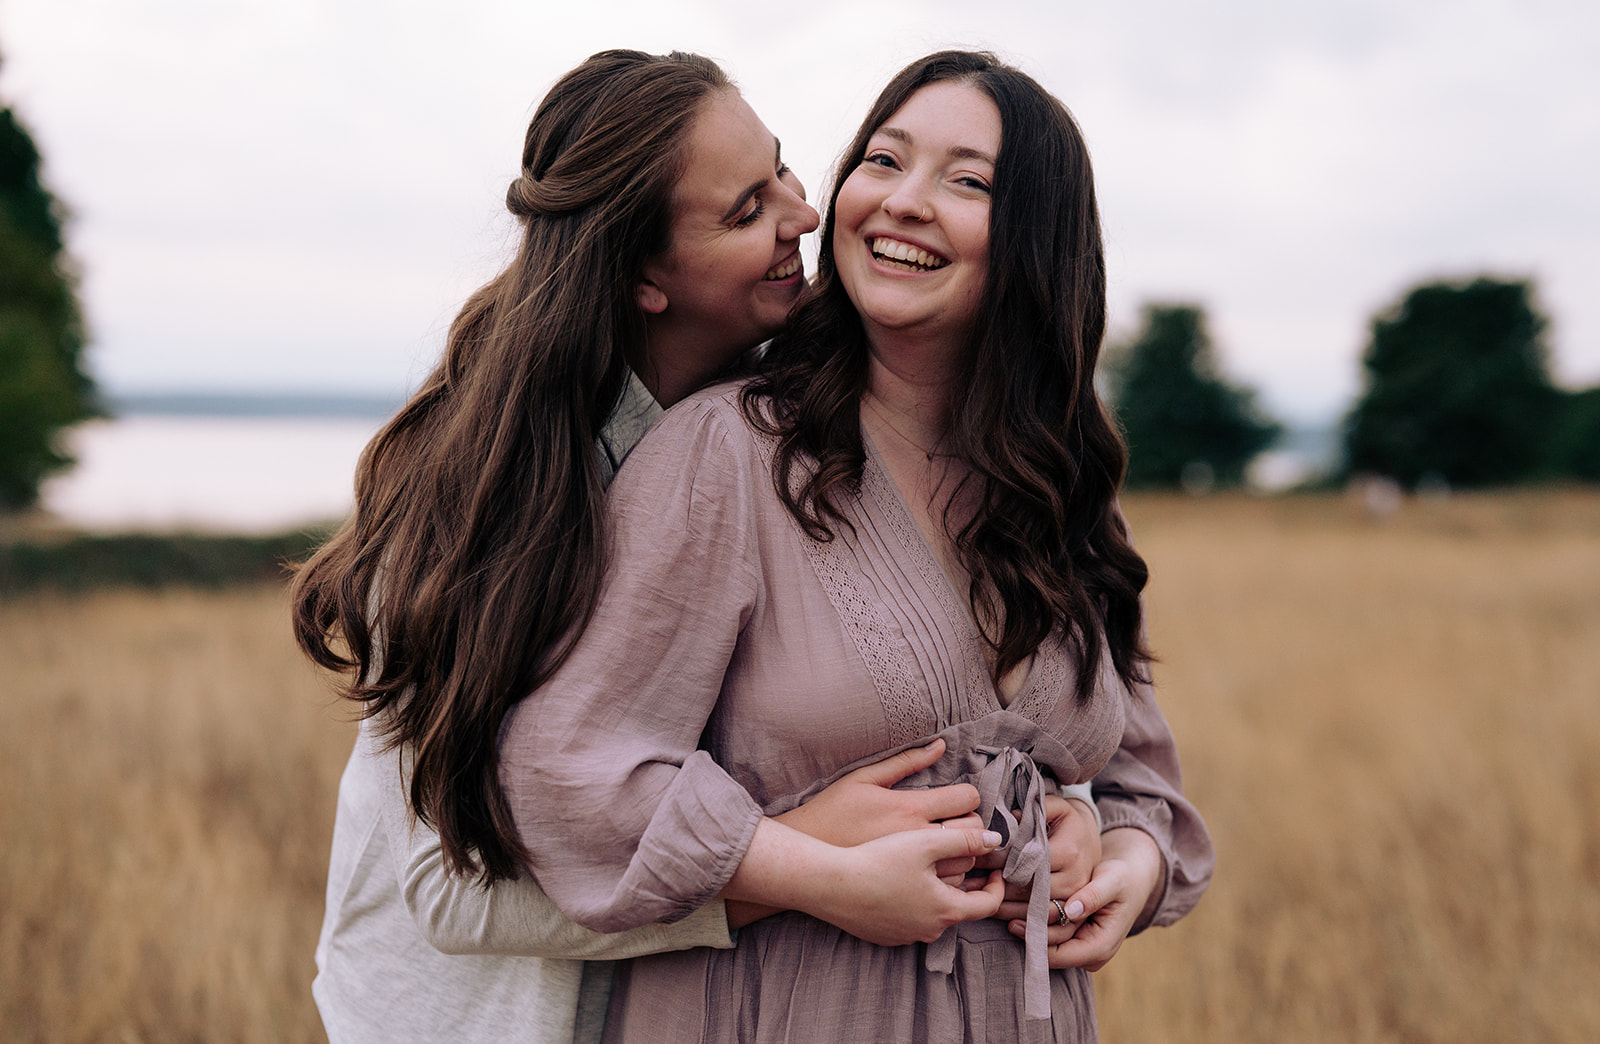 A happy couple embracing in a field, both smiling and sharing a joyful moment, with the woman in a lavender dress and the other in a light gray sweater.